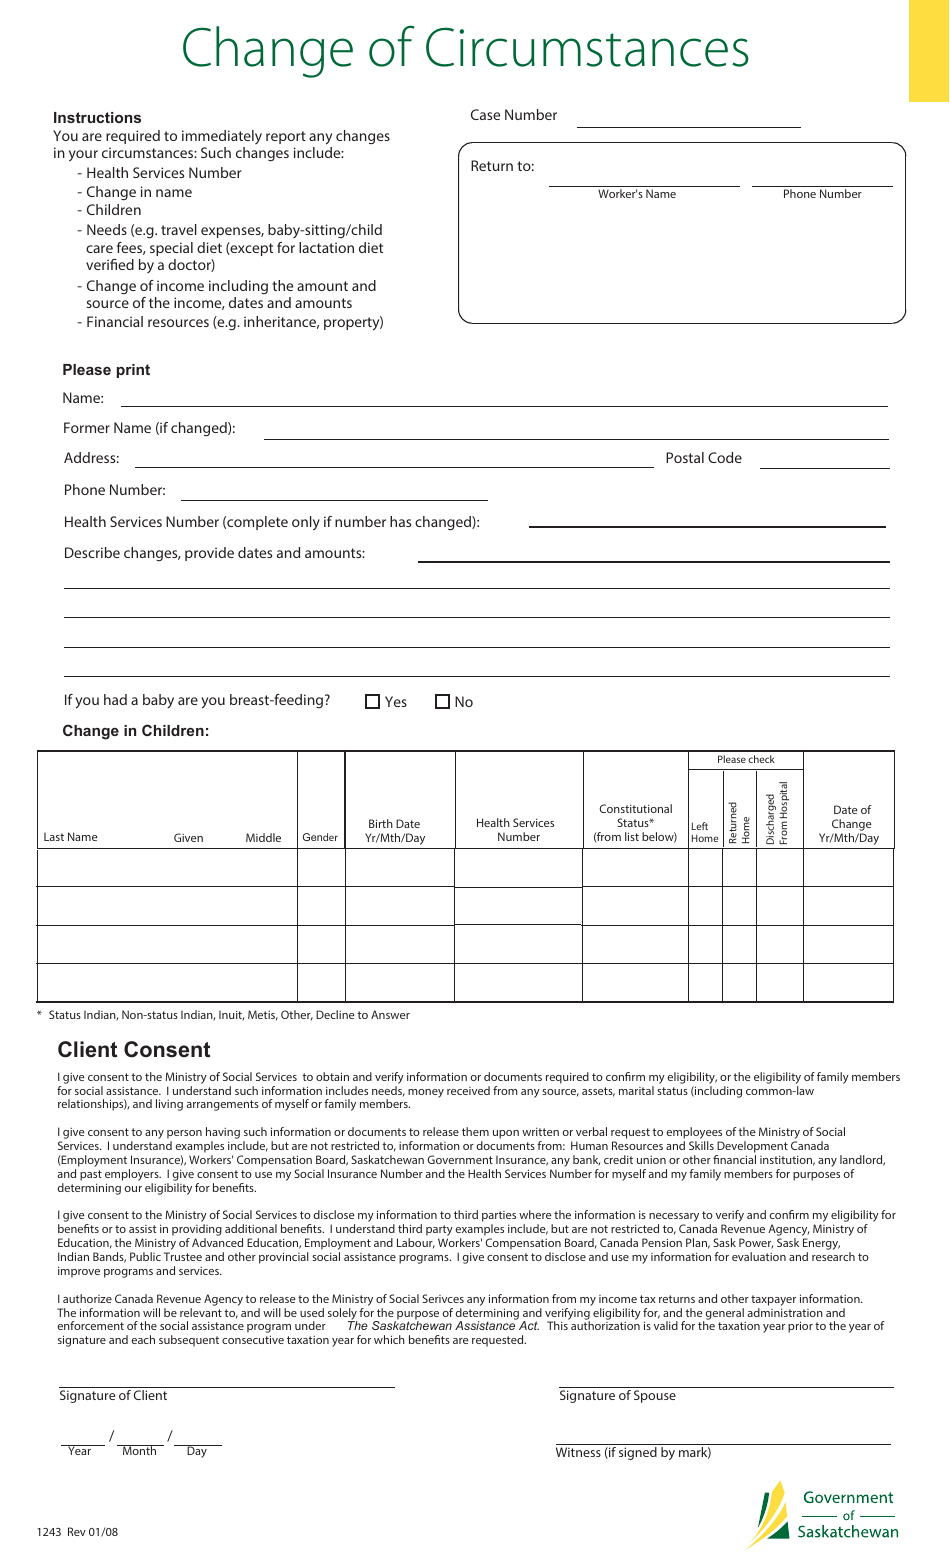 form-1243-download-fillable-pdf-or-fill-online-change-of-circumstances